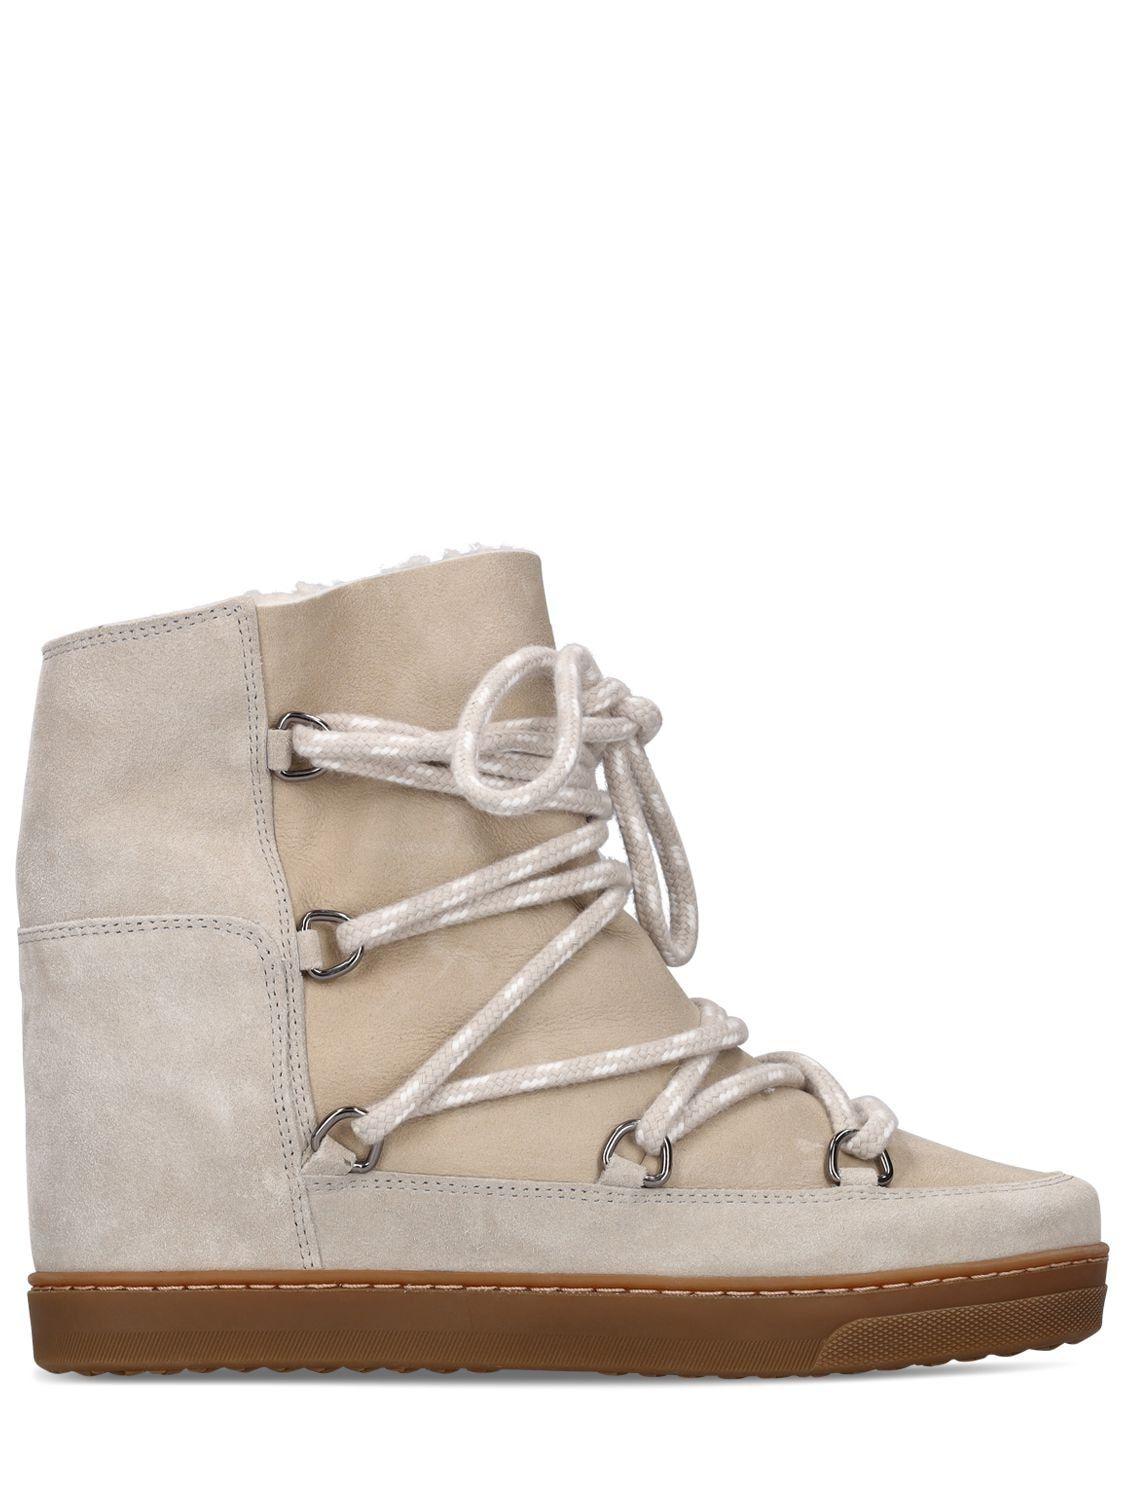 Isabel Marant 50mm Nowles Suede & Leather Wedge Boots in Natural | Lyst